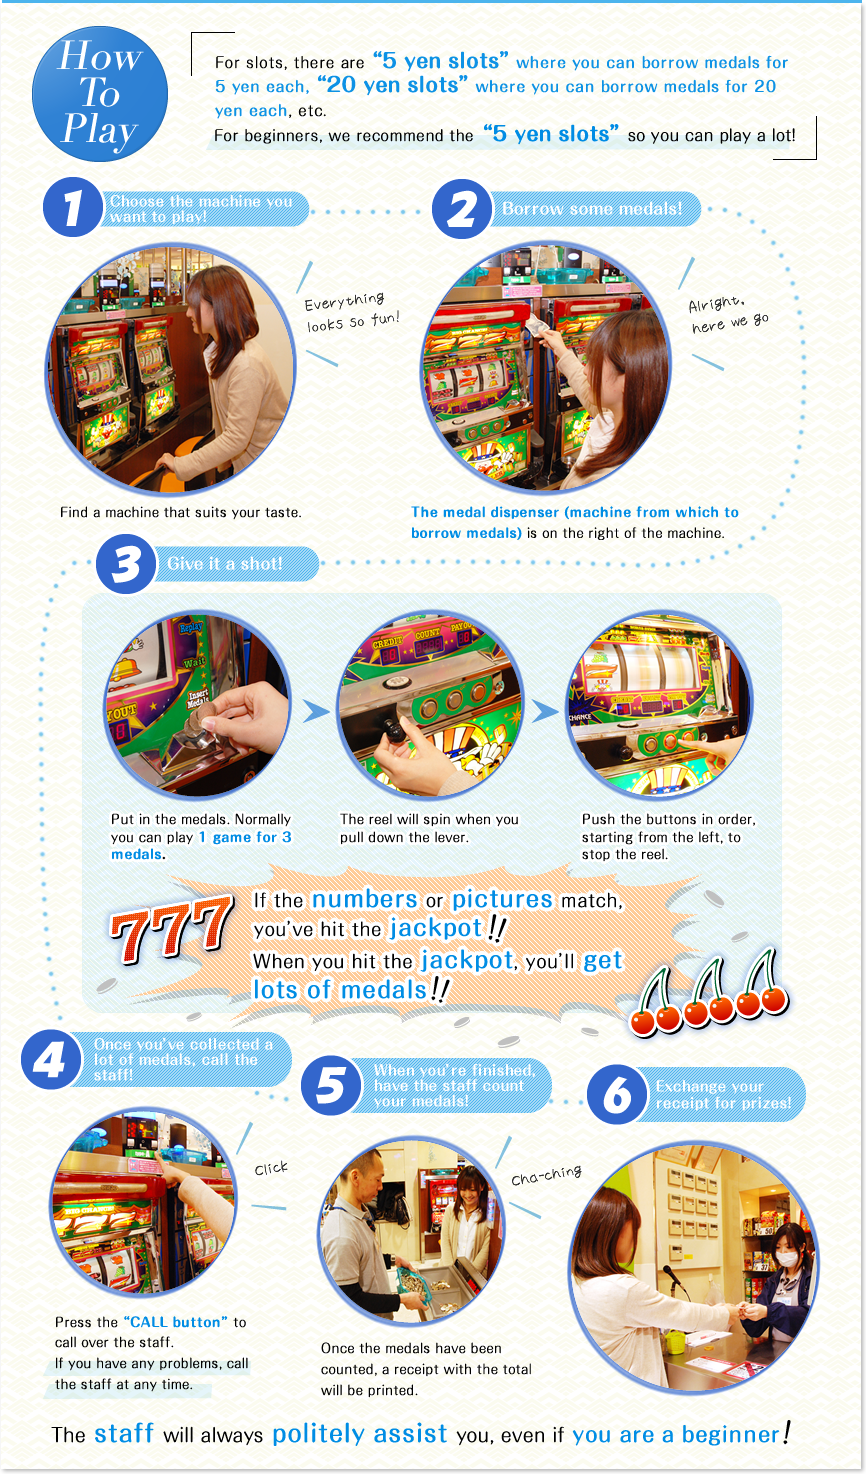 How to play Pachi-Slot